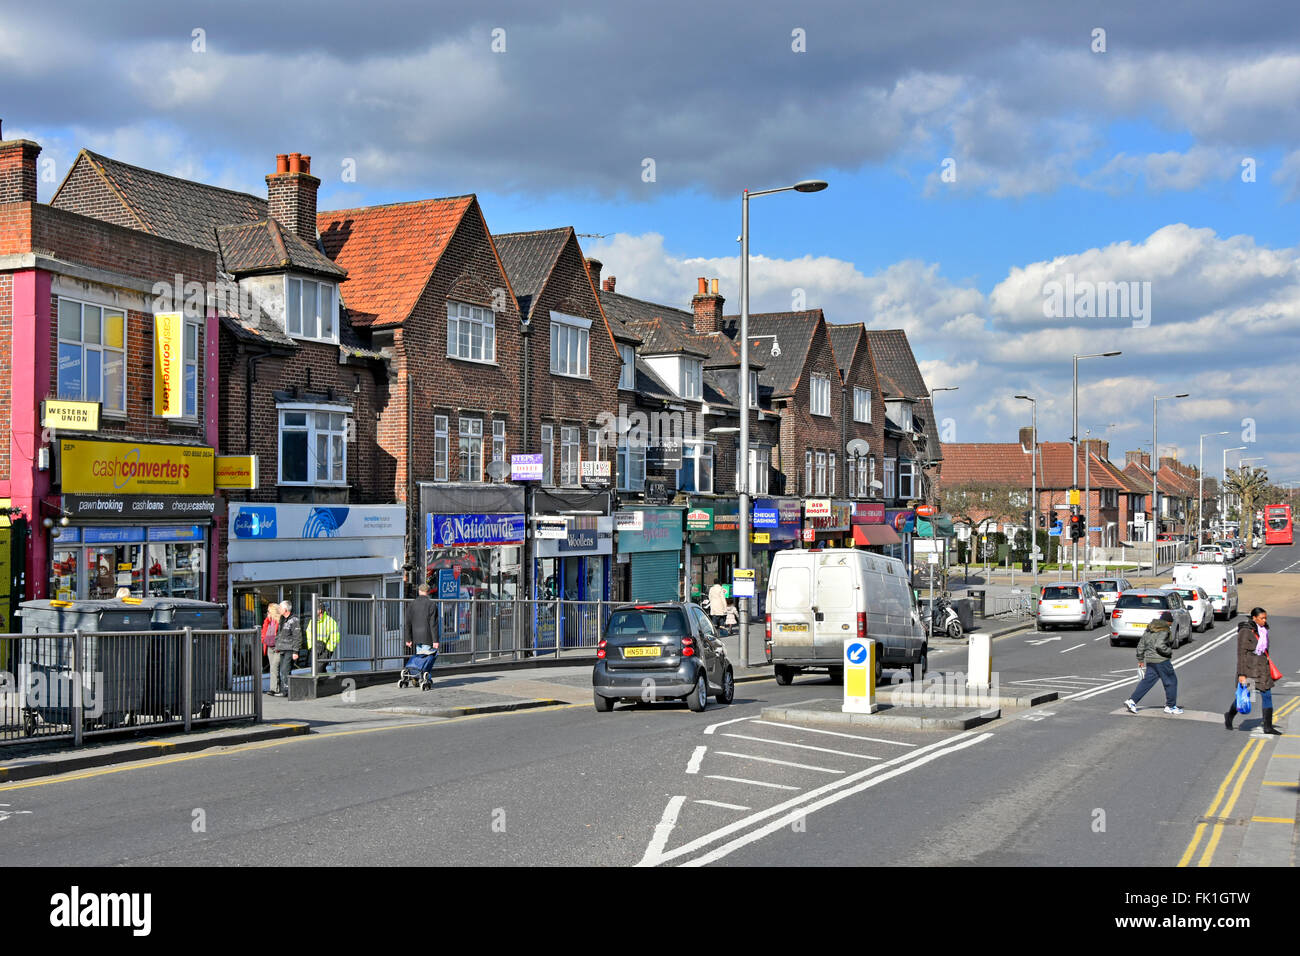 Shopping Street At Heathway On Becontree Estate Originally Created To Support Thousands Of New Homes On Lcc Social Housing Now In Barking Dagenham Stock Photo Alamy